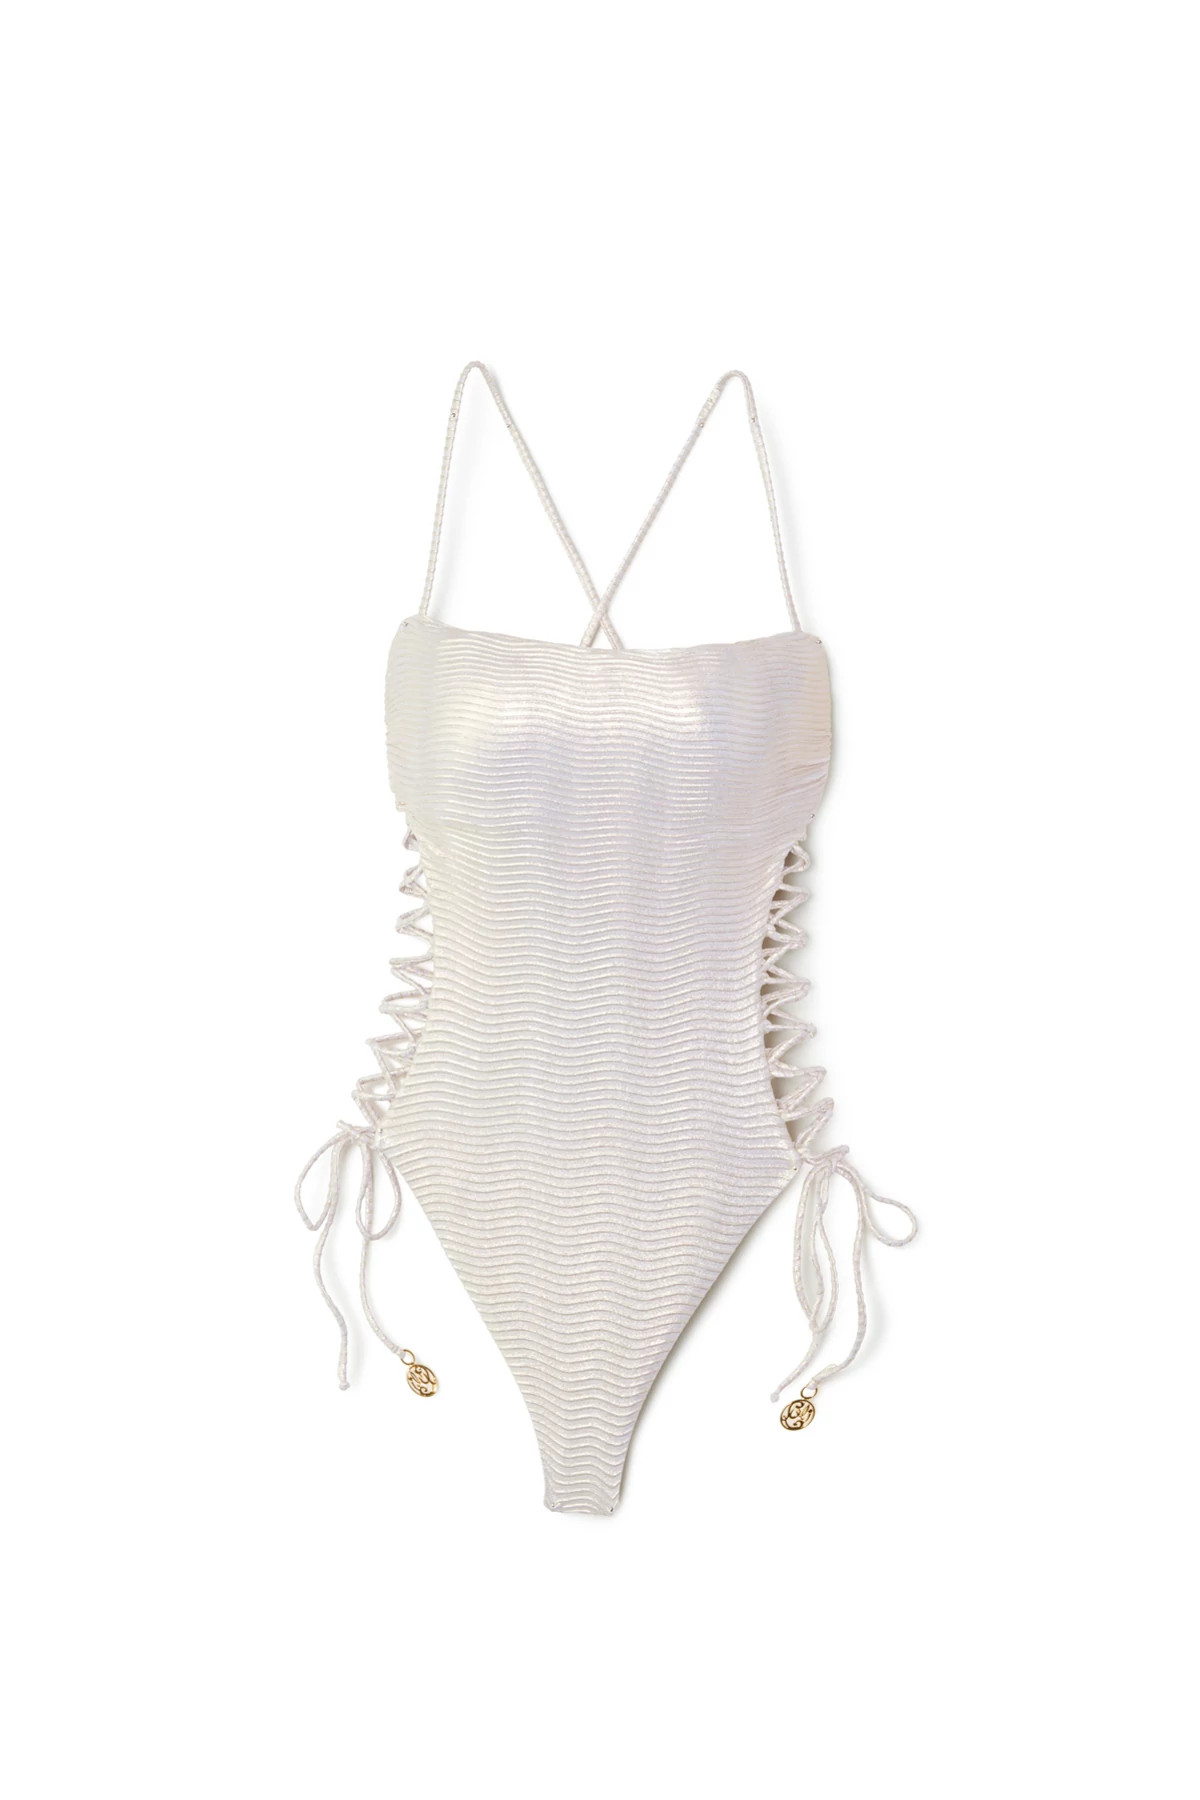 GOLD Iridescent Lace Up One Piece Swimsuit image number 6